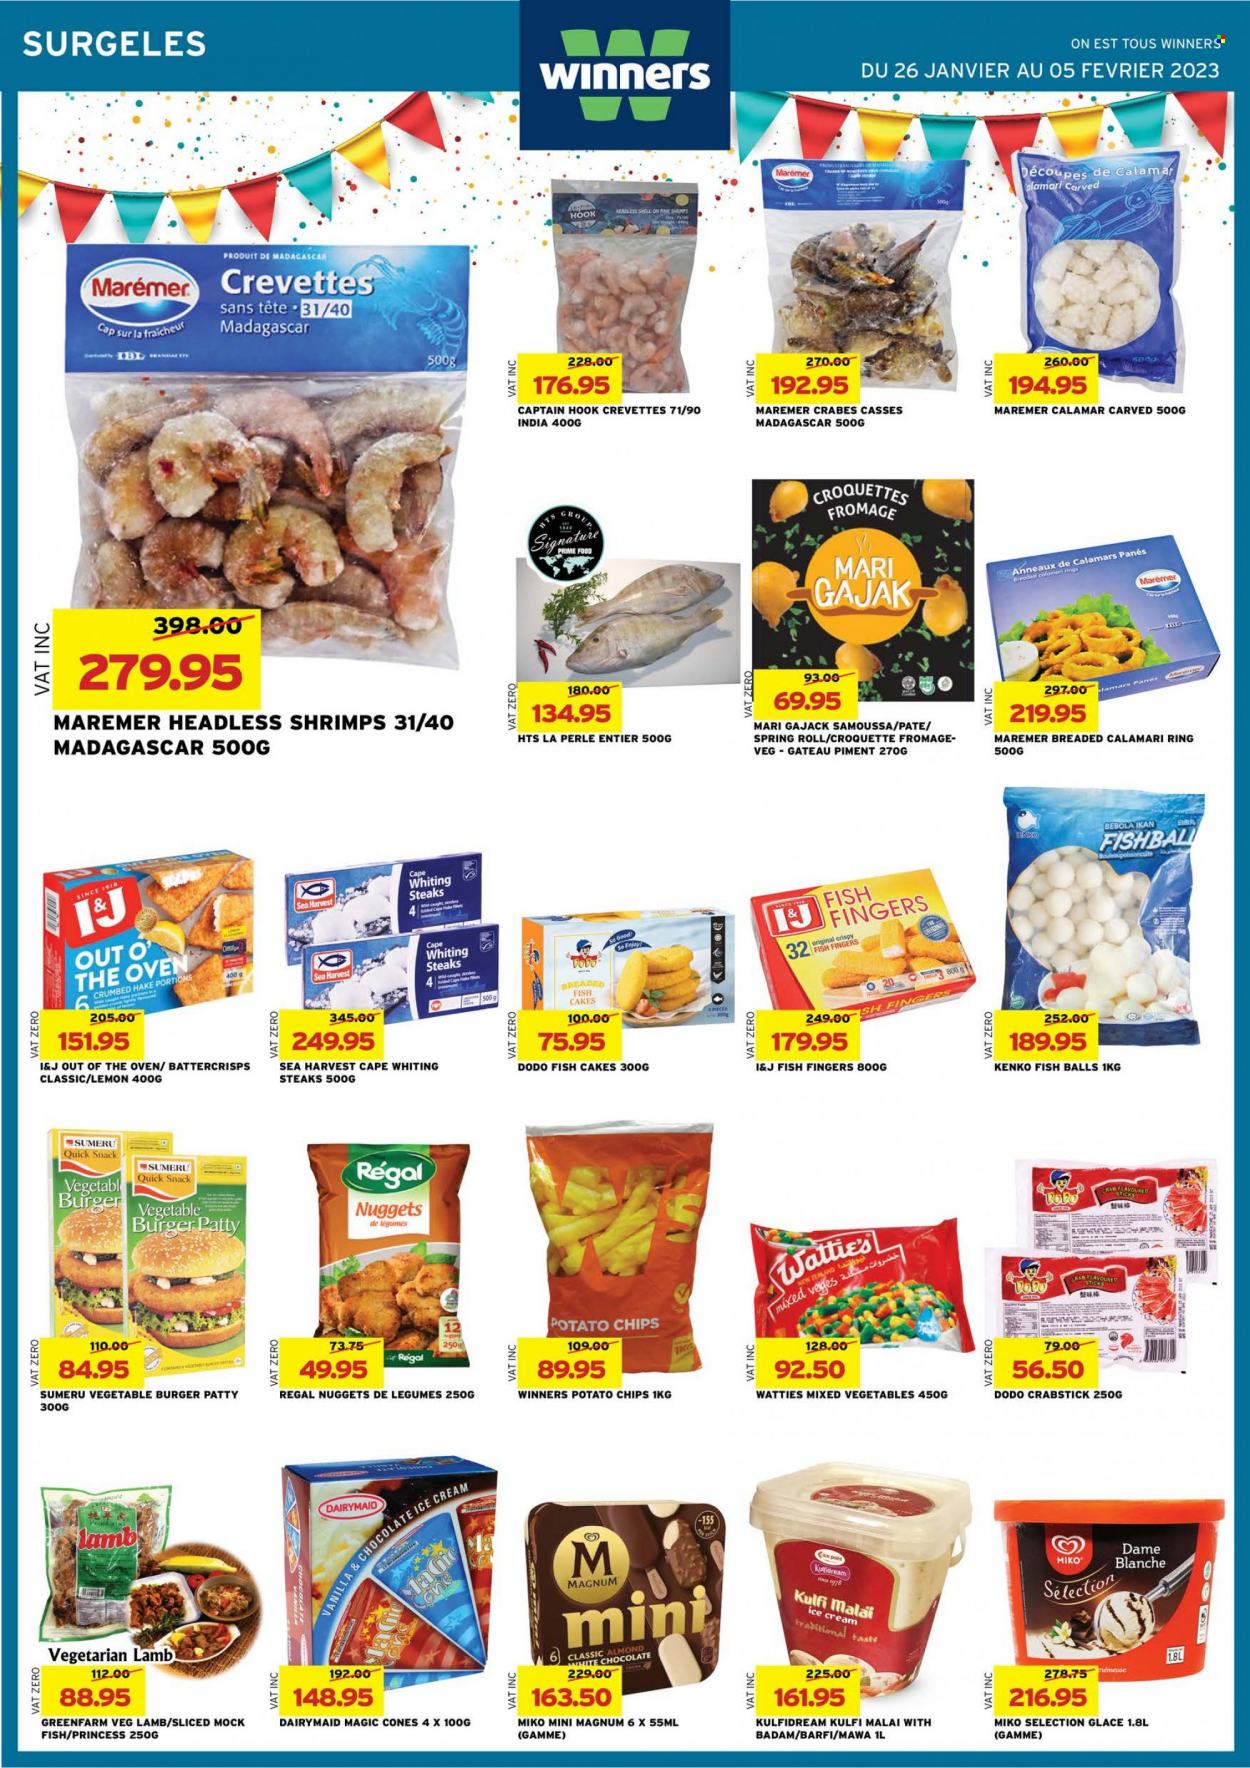 thumbnail - Winner's Catalogue - 26.01.2023 - 5.02.2023 - Sales products - calamari, hake, crab, fish, shrimps, fish fingers, whiting, Sea Harvest, fish sticks, nuggets, hamburger, Wattie's, breaded fish, Out o' the Oven, Magnum, ice cream, mixed vegetables, potato croquettes, fish cake, white chocolate, snack, potato chips, chips, steak. Page 8.